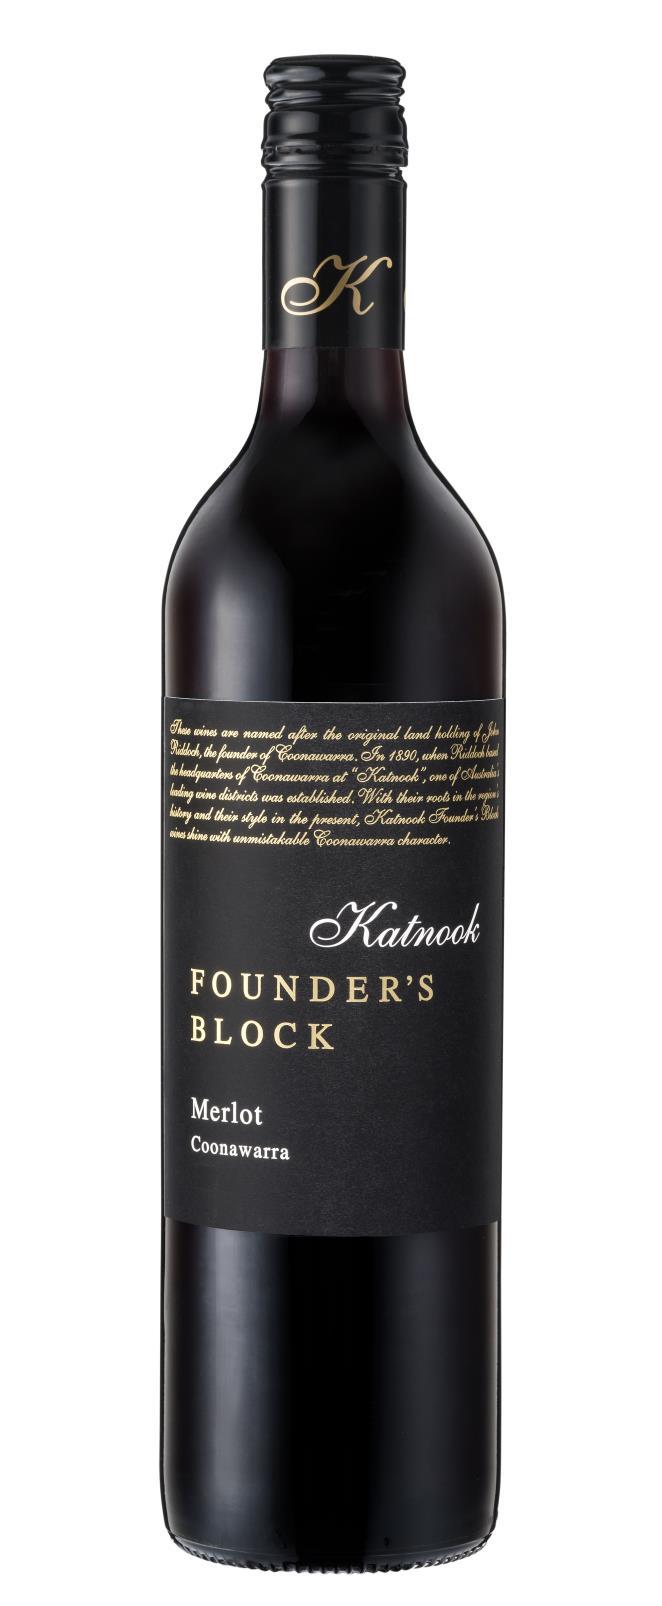 wines are named in honour of the The Founder s Block range is styled for everyday enjoyment, inviting a modern generation of wine consumers to explore the pleasures of Coonawarra wine.